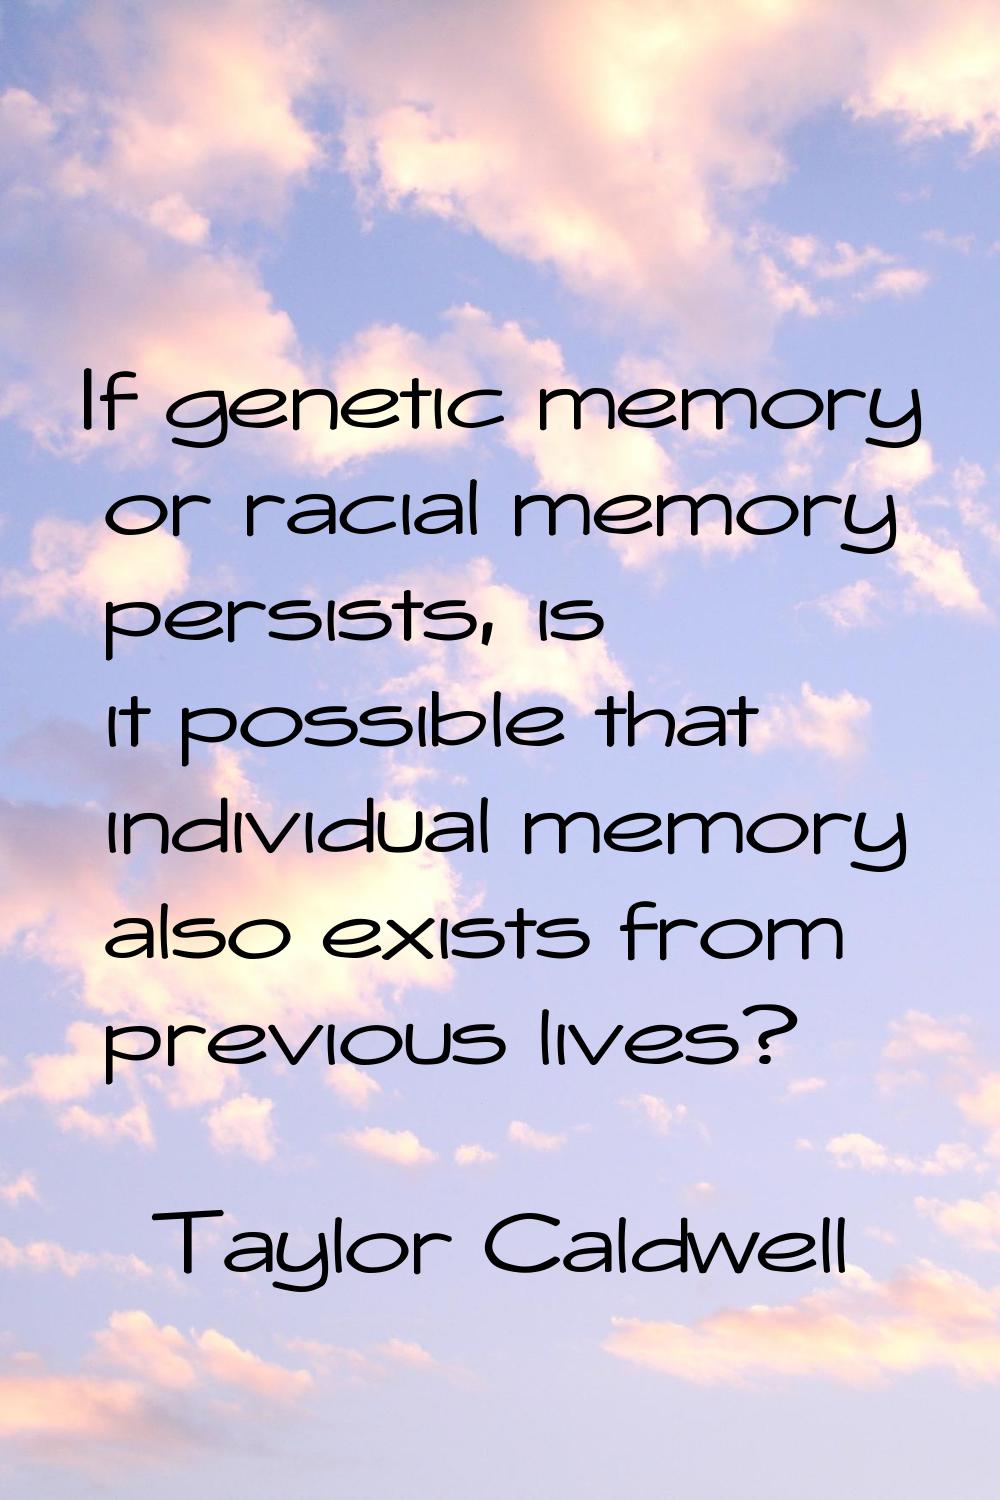 If genetic memory or racial memory persists, is it possible that individual memory also exists from